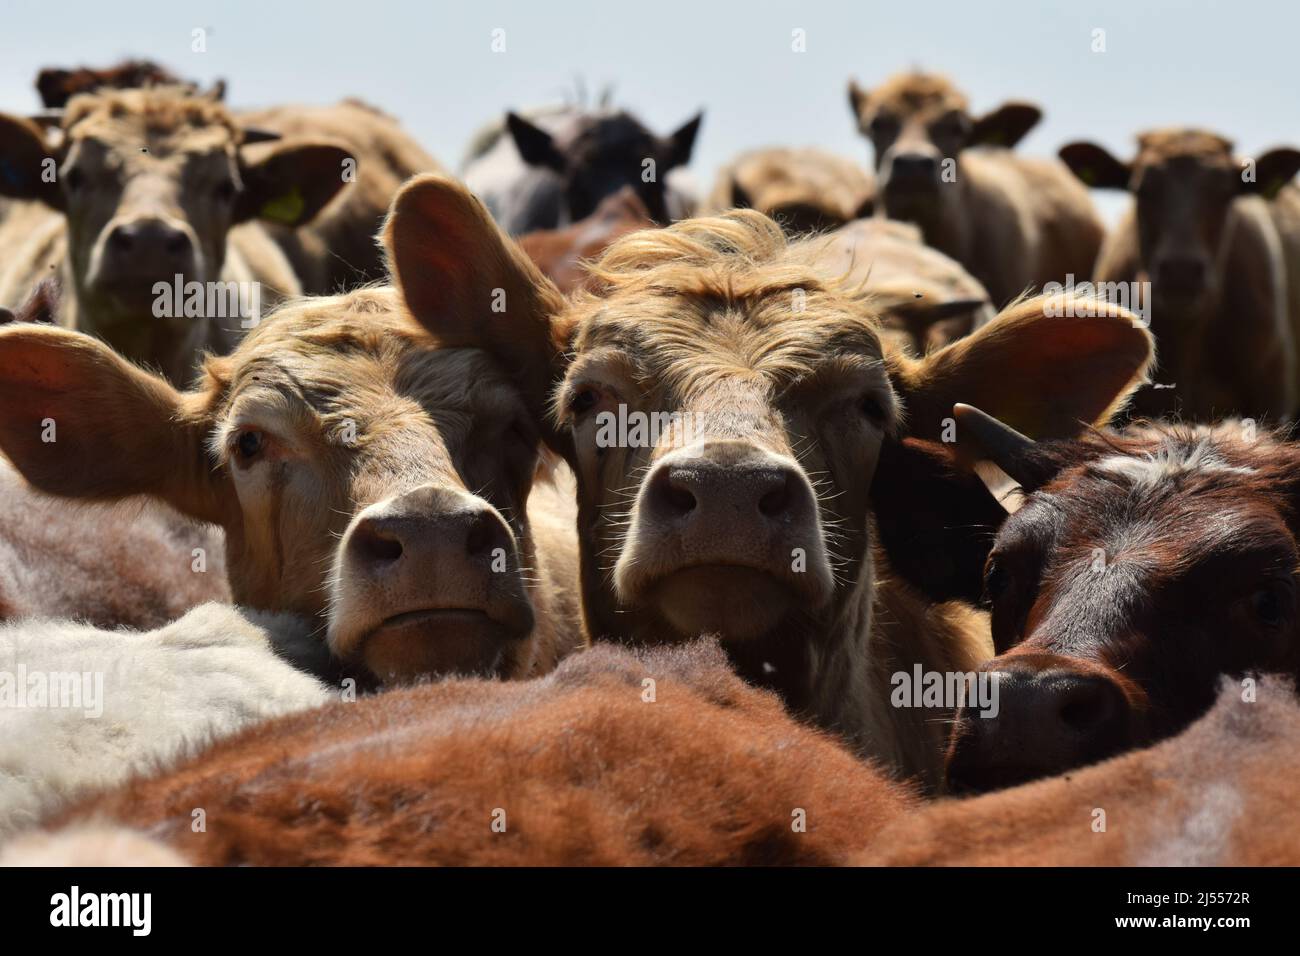 A close up photograph of a herd of British dairy cows facing the camera Stock Photo